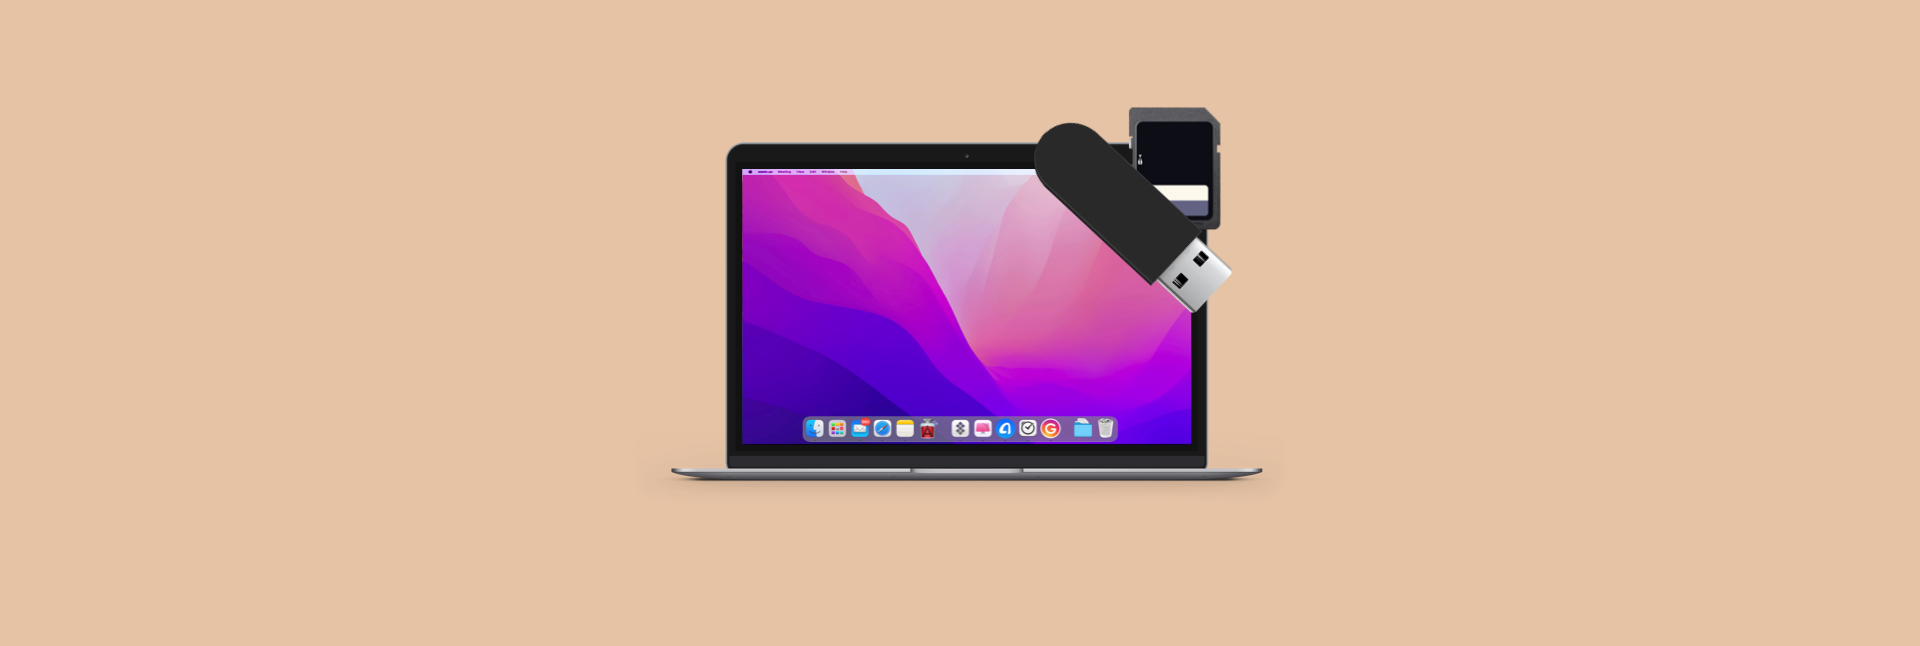 Peer Diplomati generøsitet How To Format USB And SD Card On Mac In Seconds – Setapp